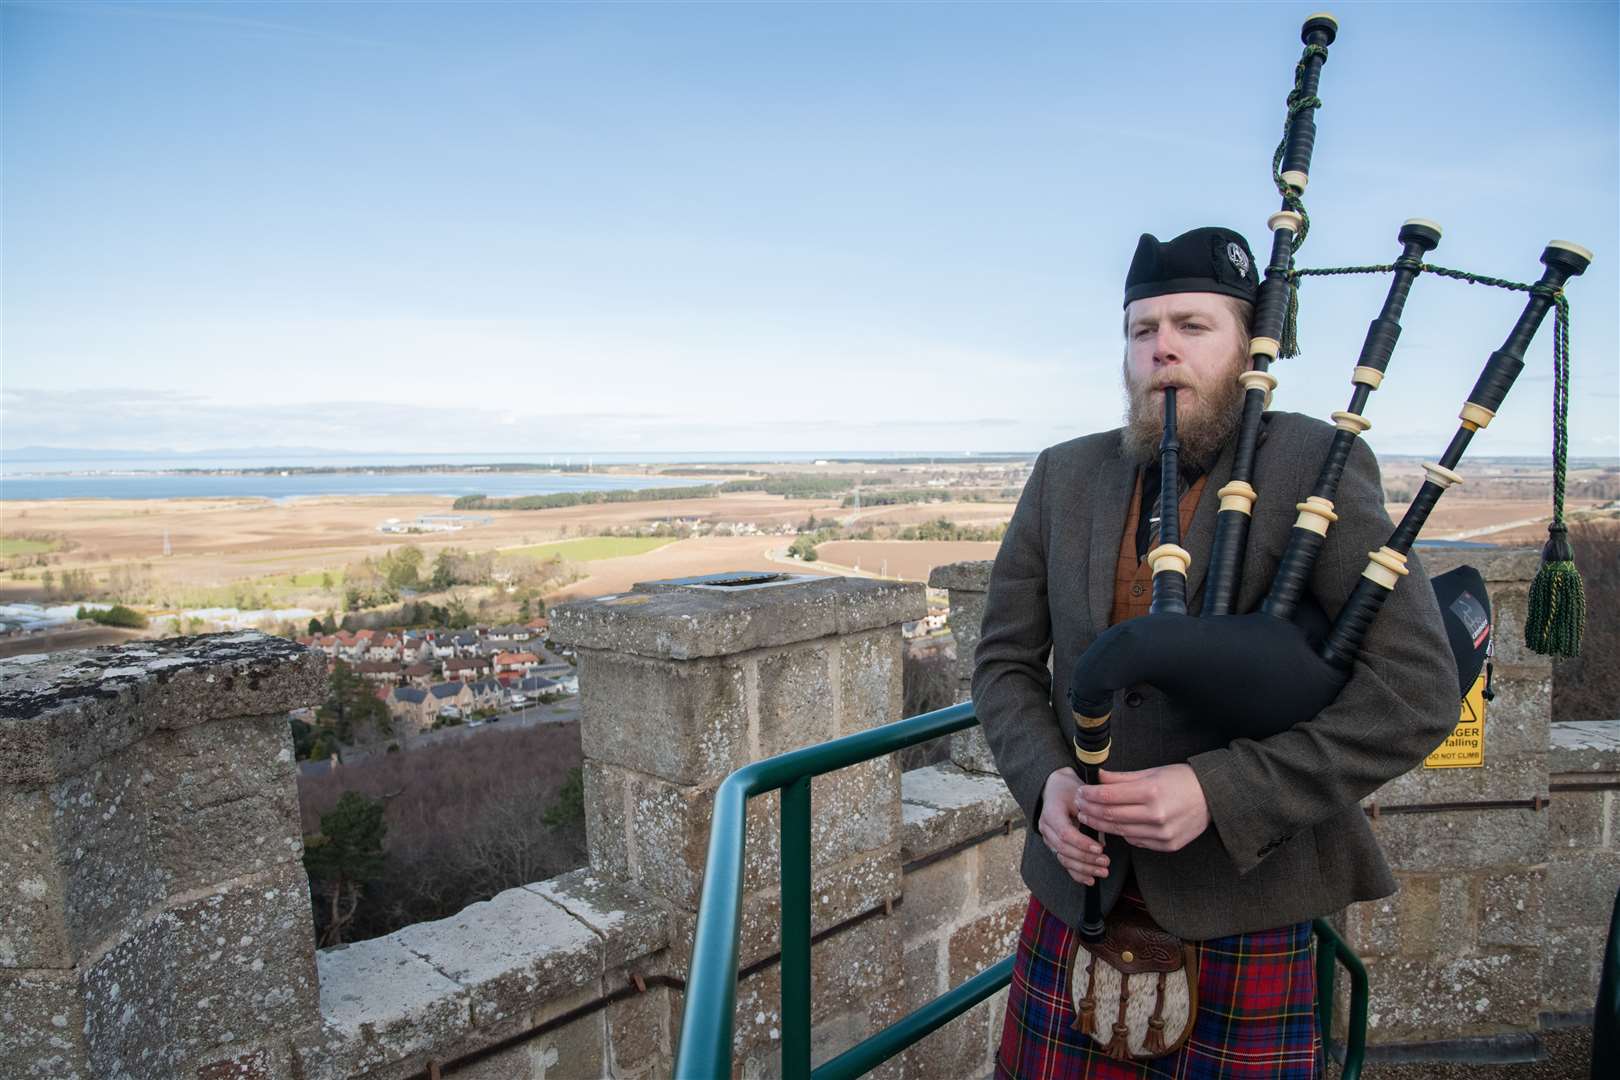 Scott showing off his skills as well as the best views in Forres. Picture: Daniel Forsyth